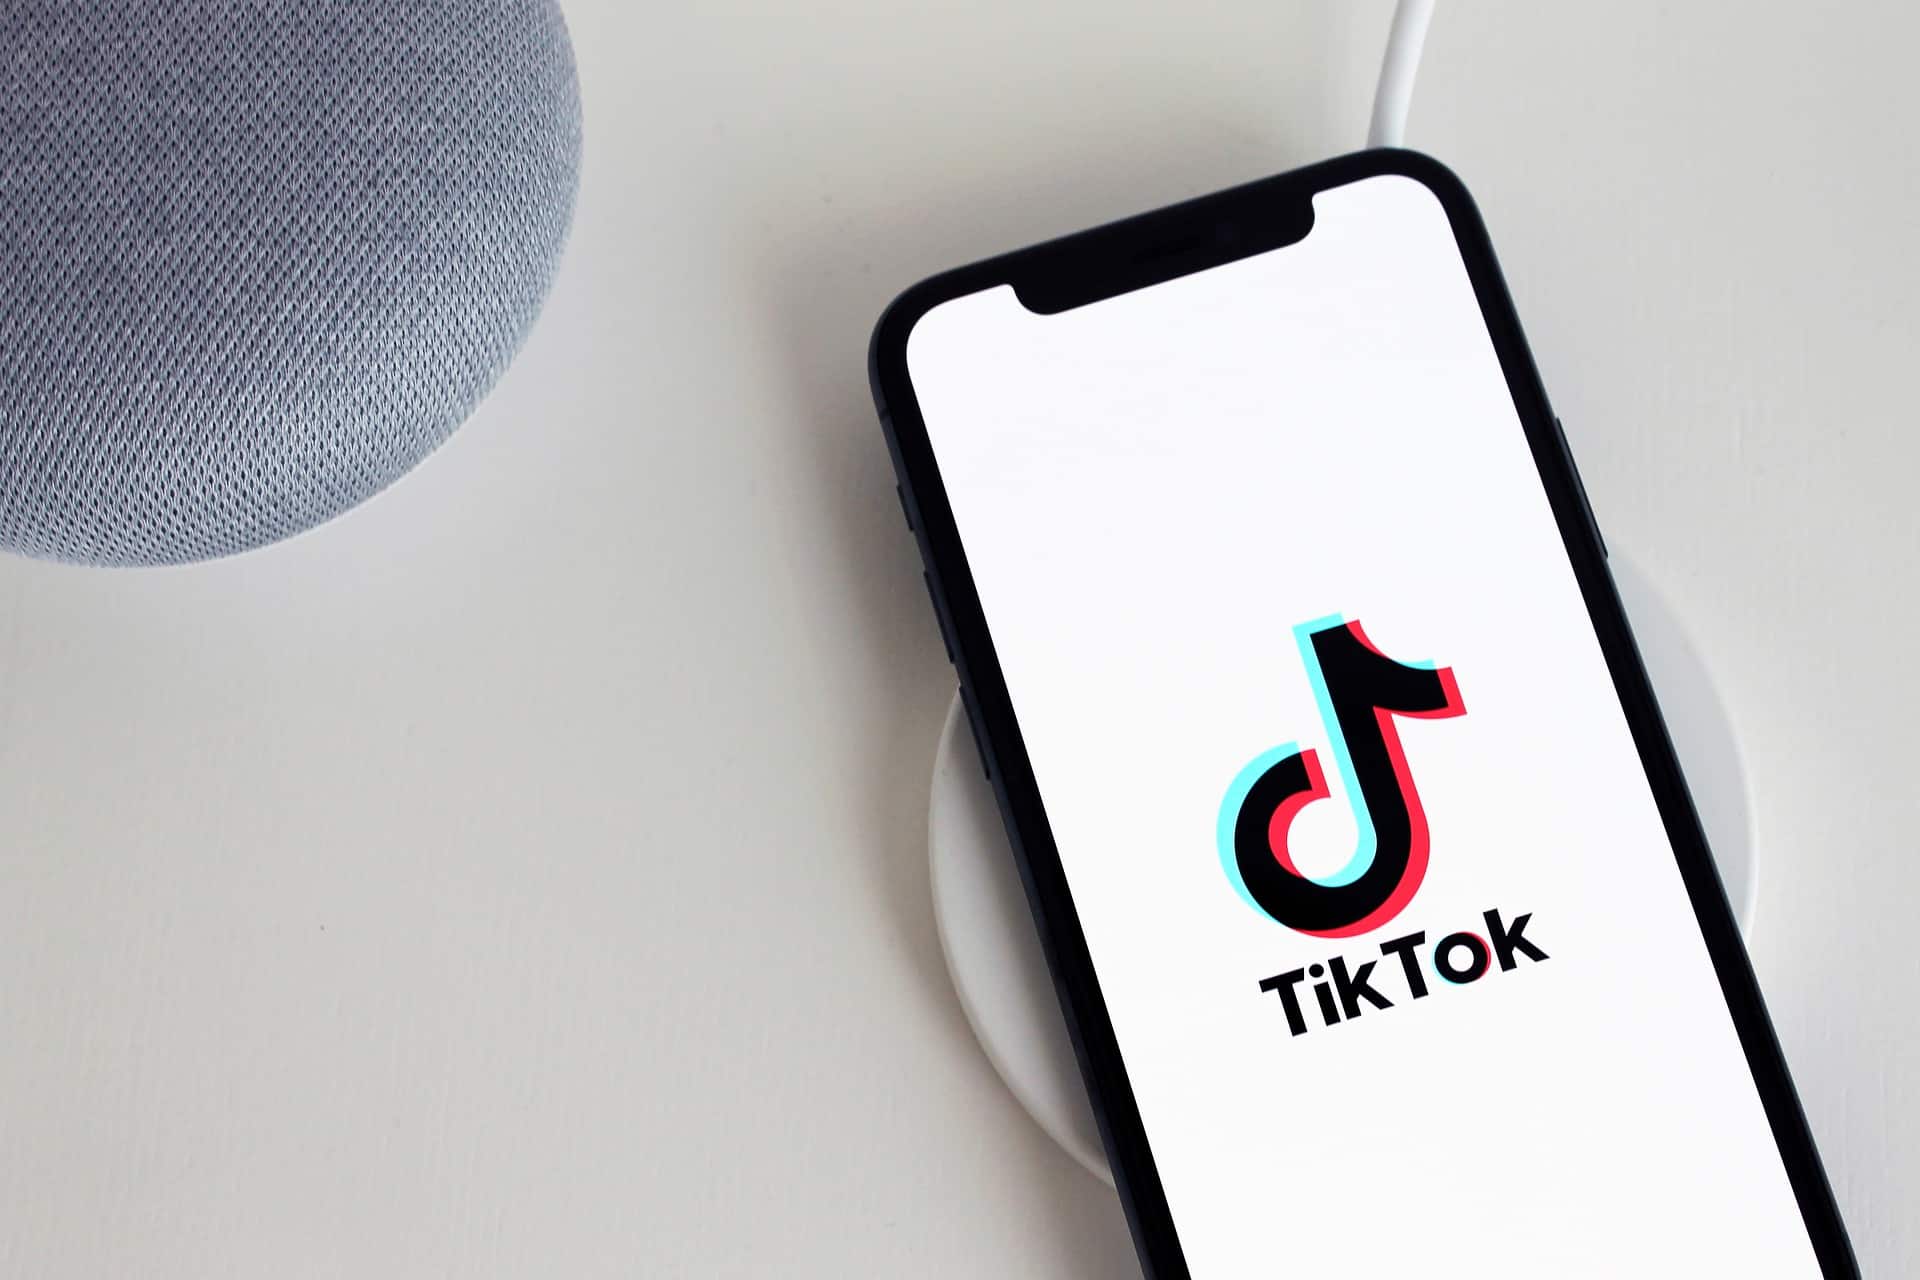 ByteDance Will Shut Down TikTok in US Rather Than Comply with Divestment Demand